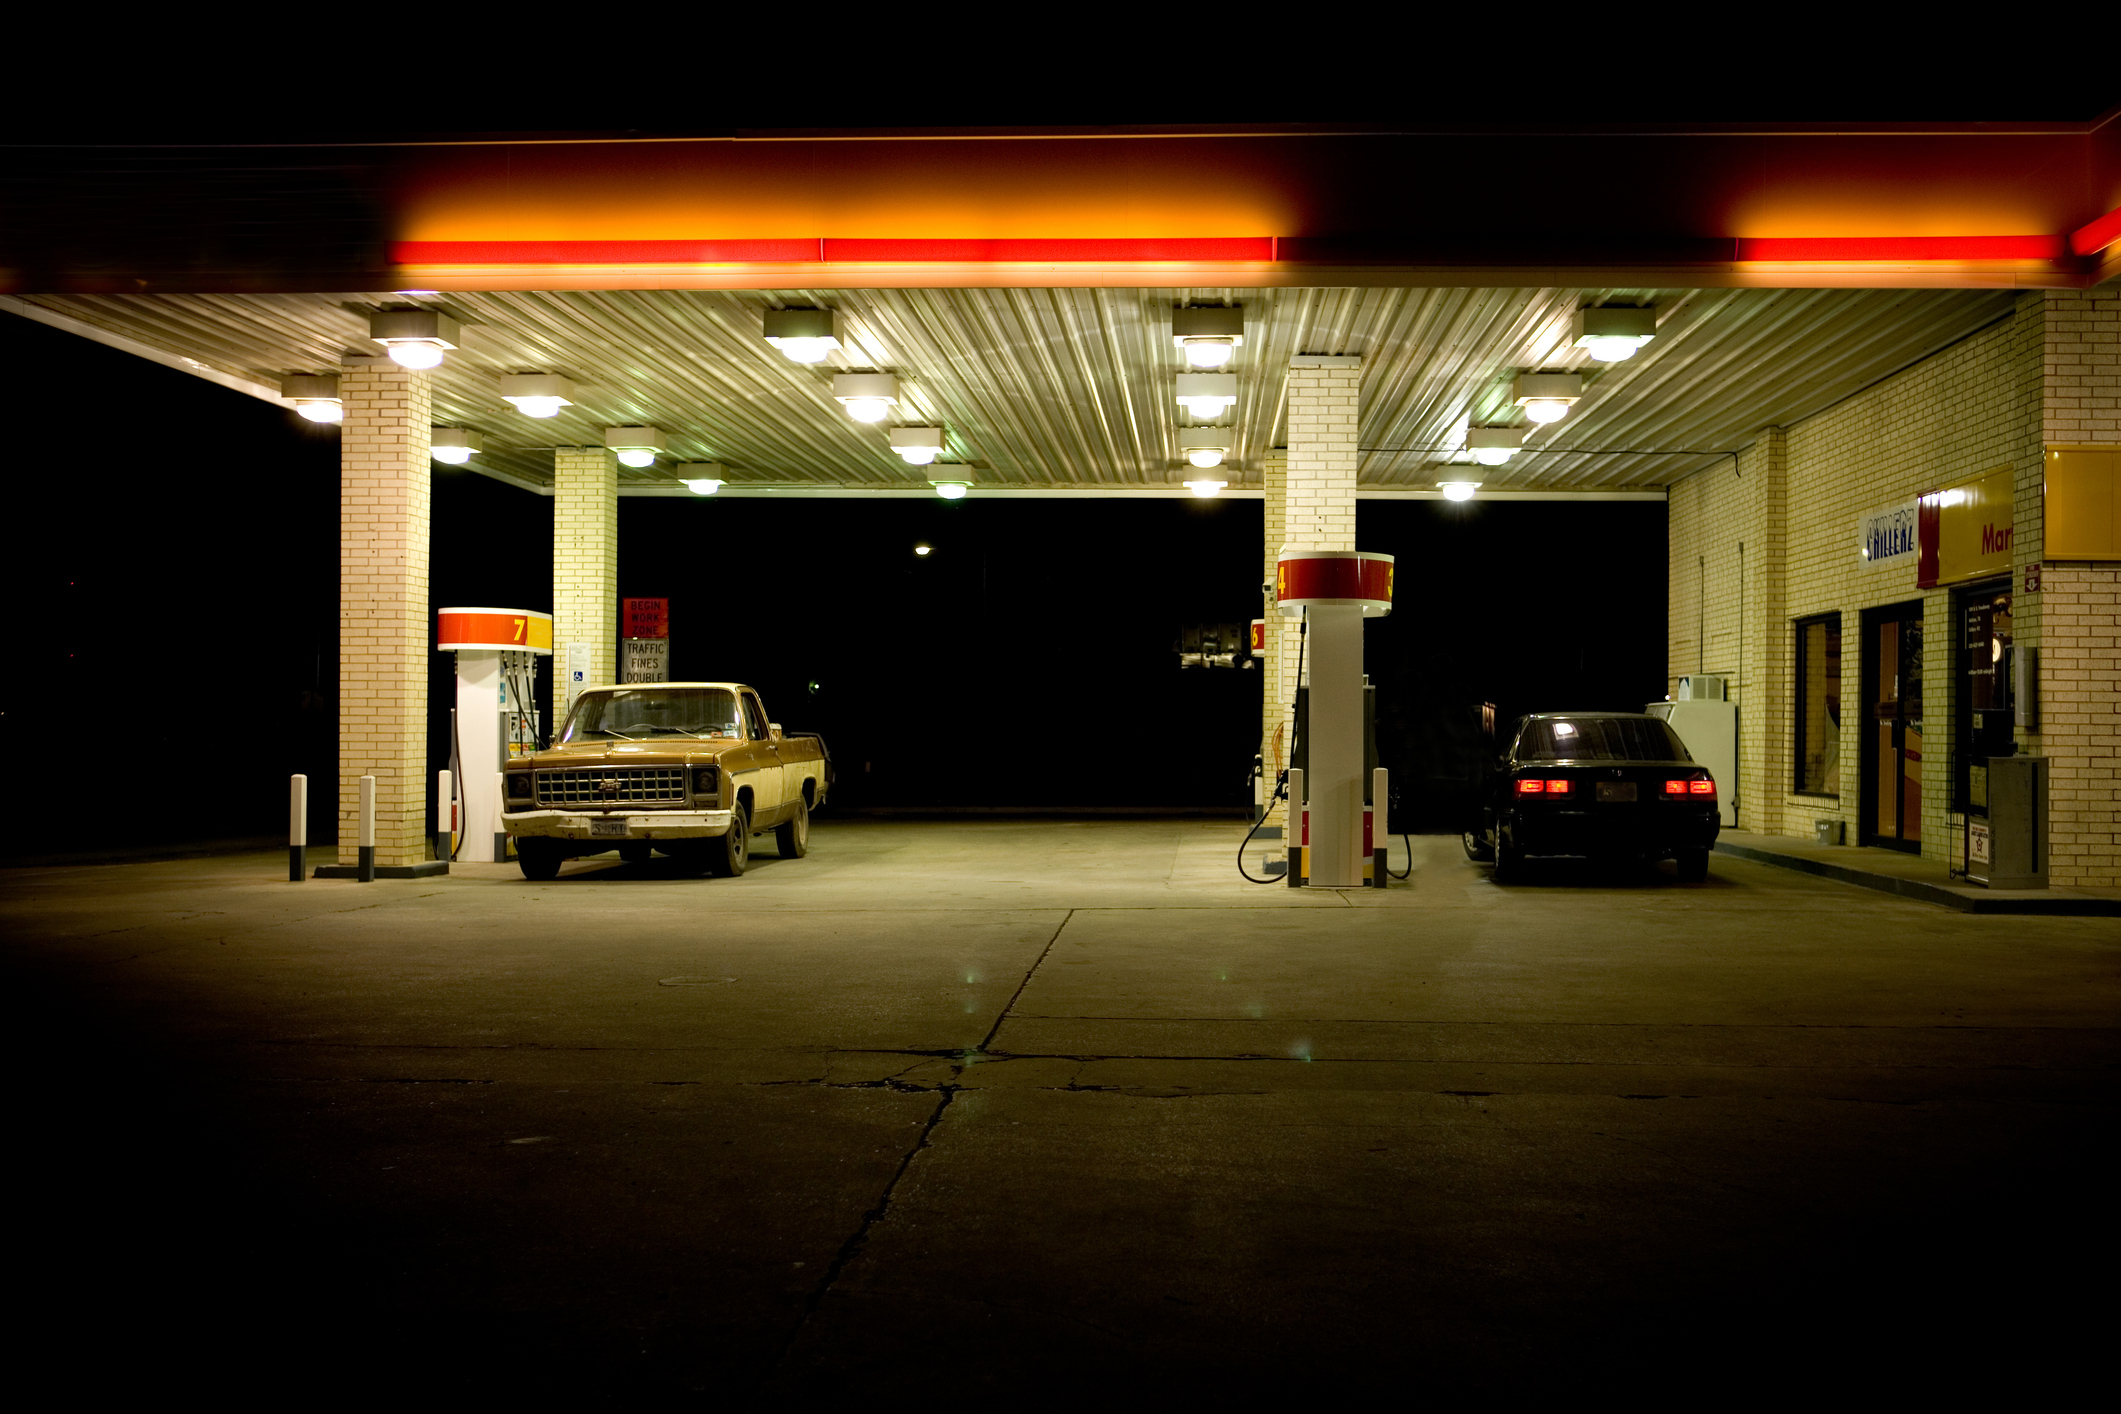 A night scene at a gas station with illuminated canopy and two vehicles parked at the pumps